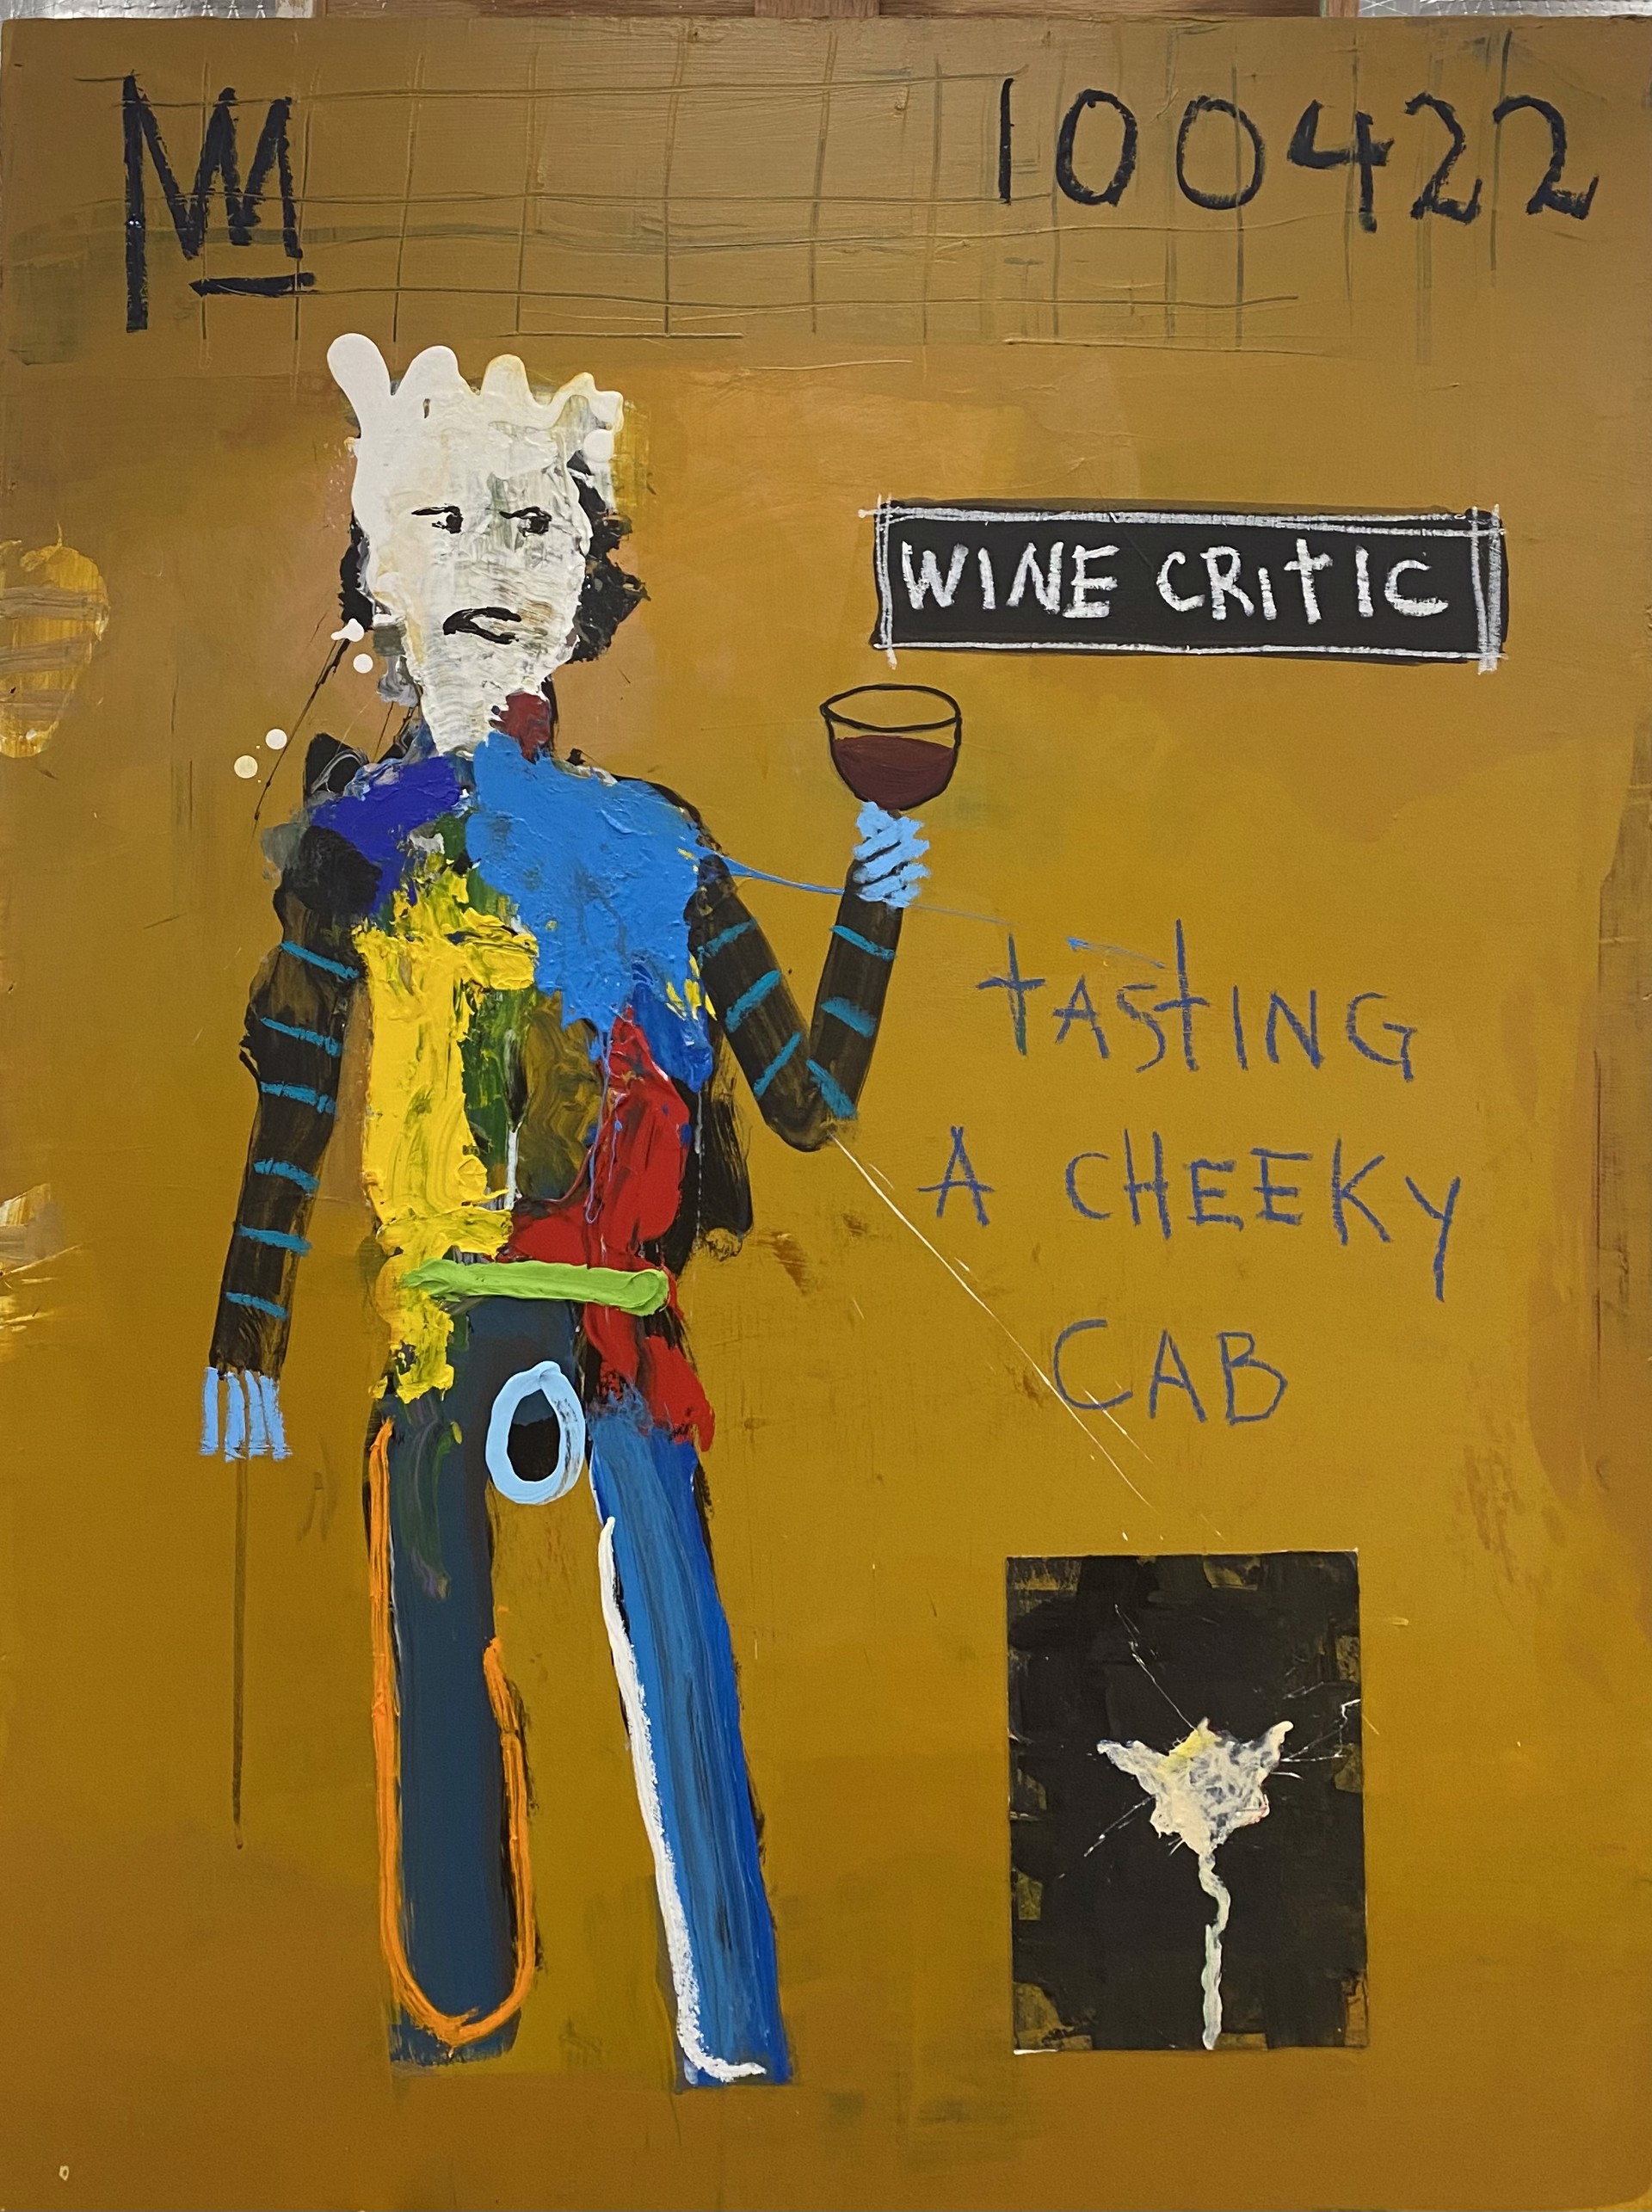 Wine Critic Tasting Cheeky Cab by Michael Snodgrass